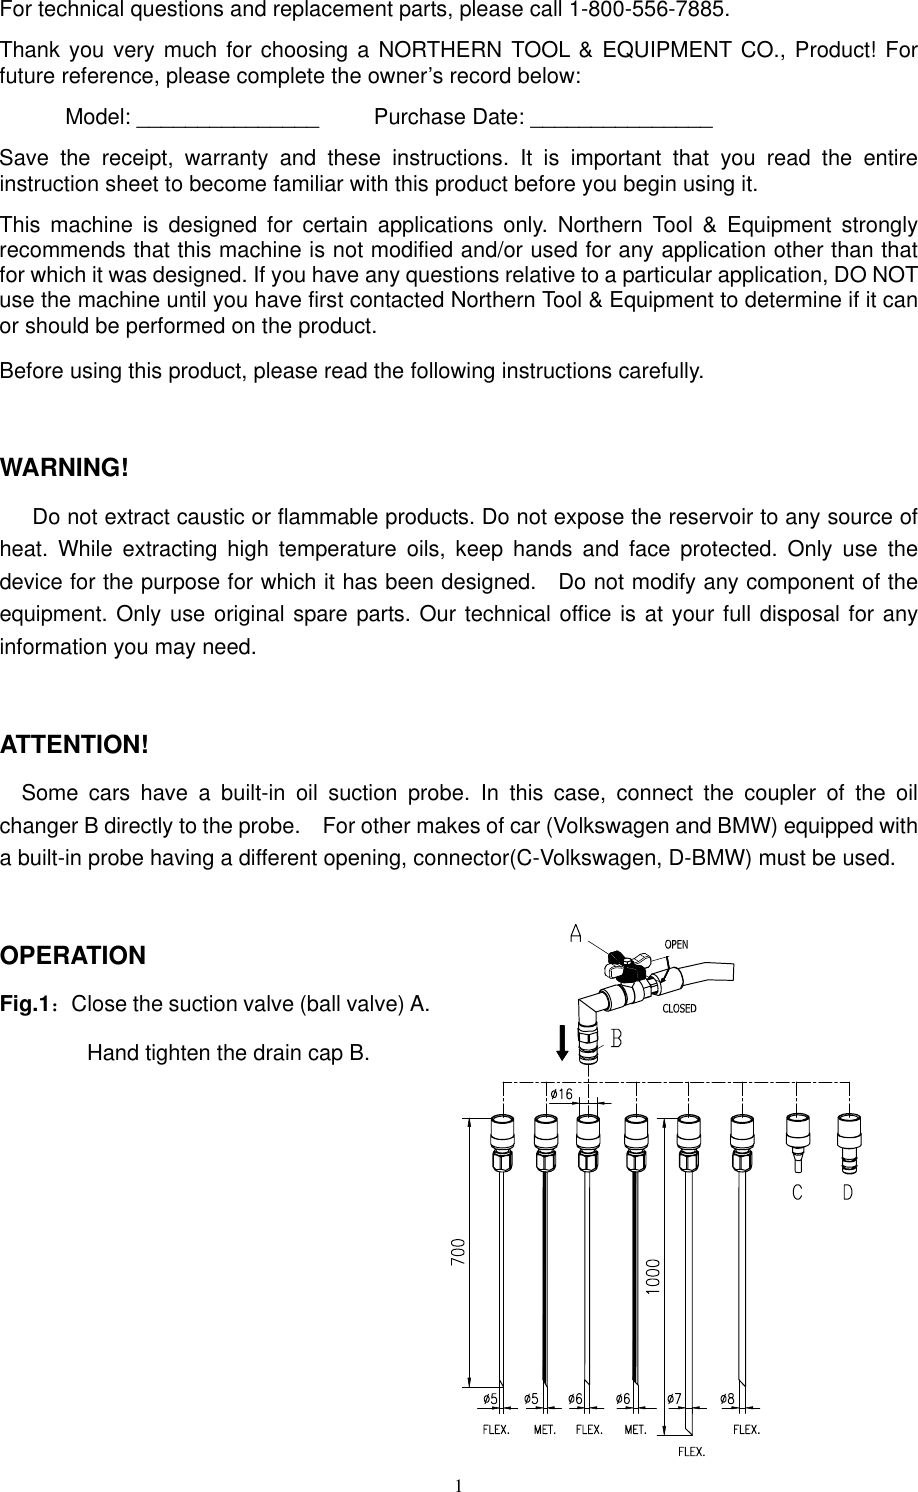 Page 2 of 4 - Northern-Industrial-Tools Northern-Industrial-Tools-109088-Users-Manual- WARNING  Northern-industrial-tools-109088-users-manual